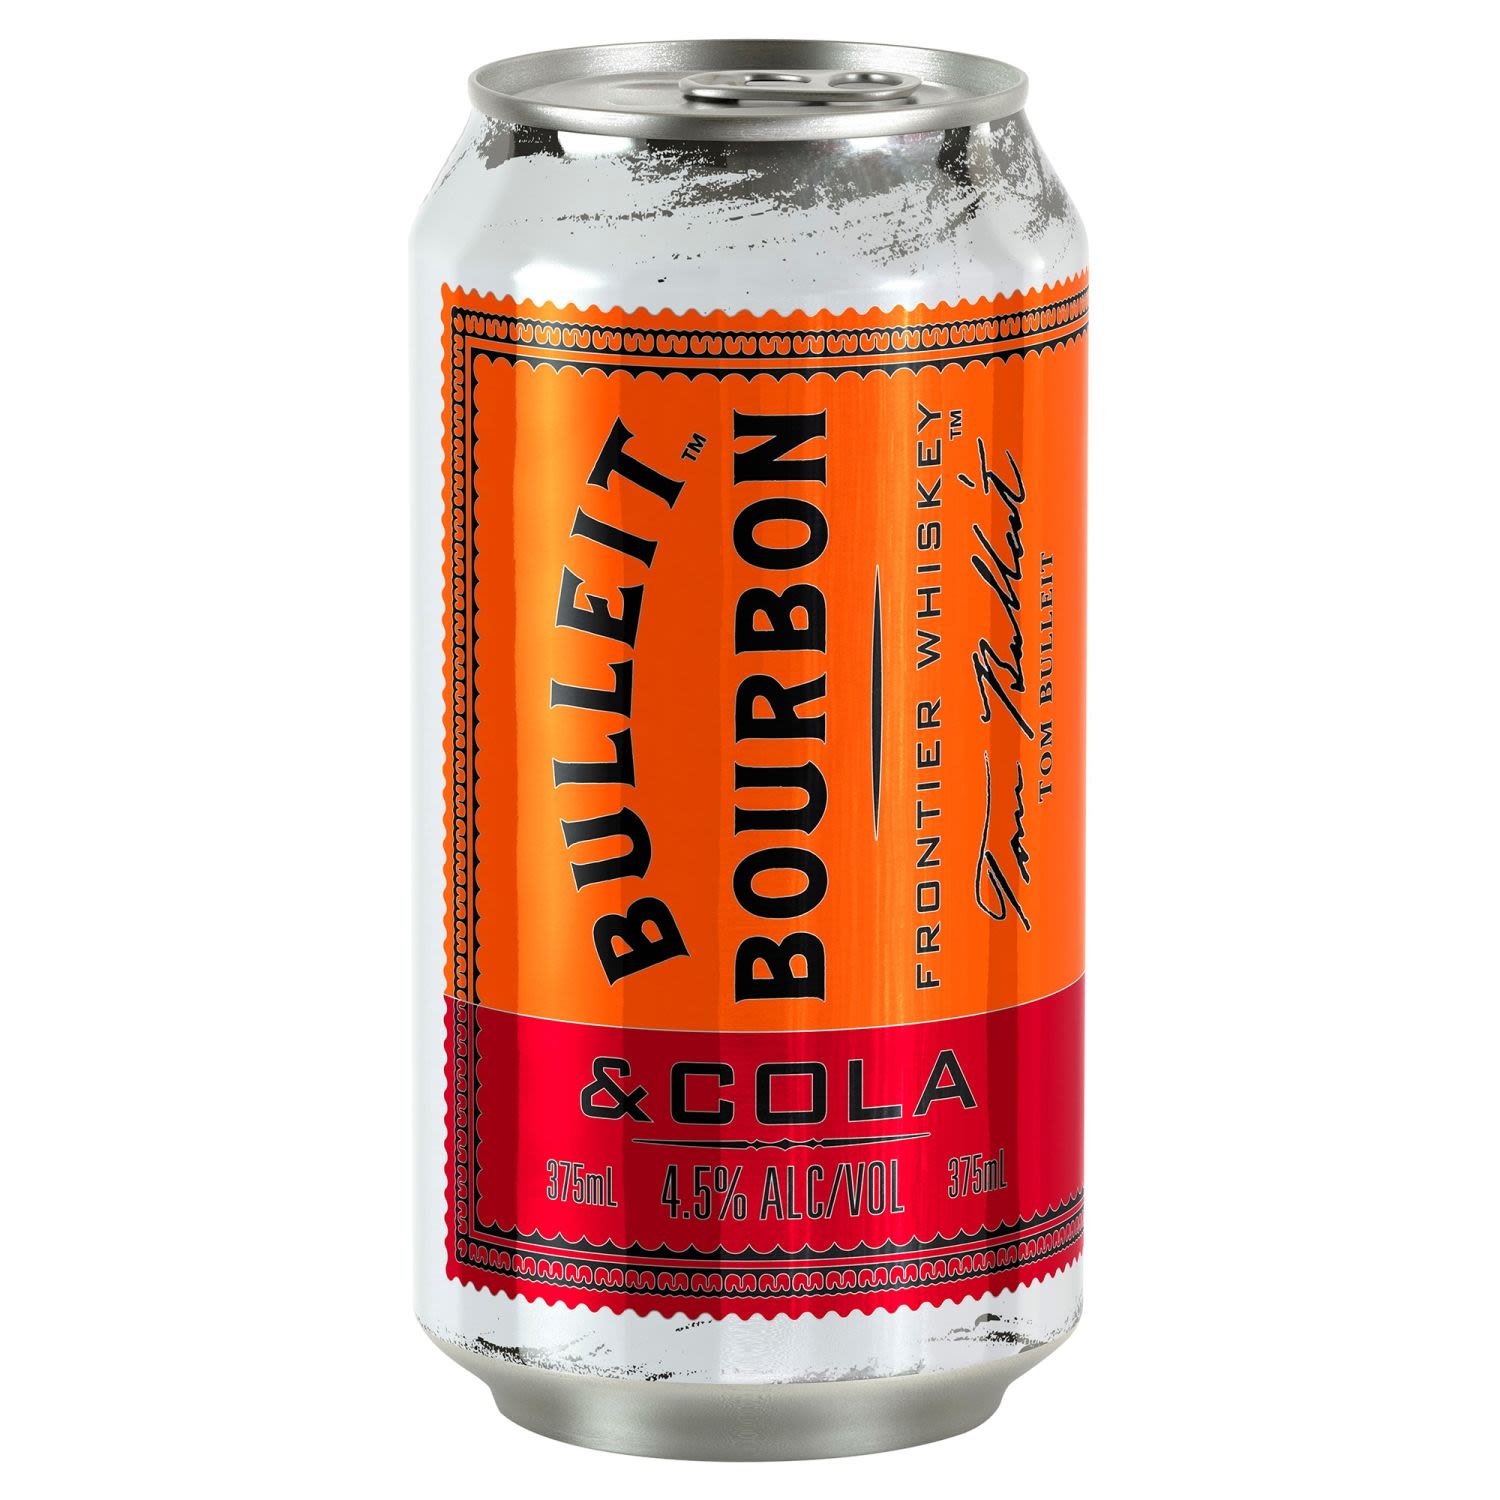 One of the driest of all bourbons, delivering a full-bodied and spicy taste with a long, smooth finish. Now pre-mixed in a can with cola ready for your convenience and enjoyment.<br /> <br />Alcohol Volume: 4.50%<br /><br />Pack Format: 24 Pack<br /><br />Standard Drinks: 1.3</br /><br />Pack Type: Can<br />